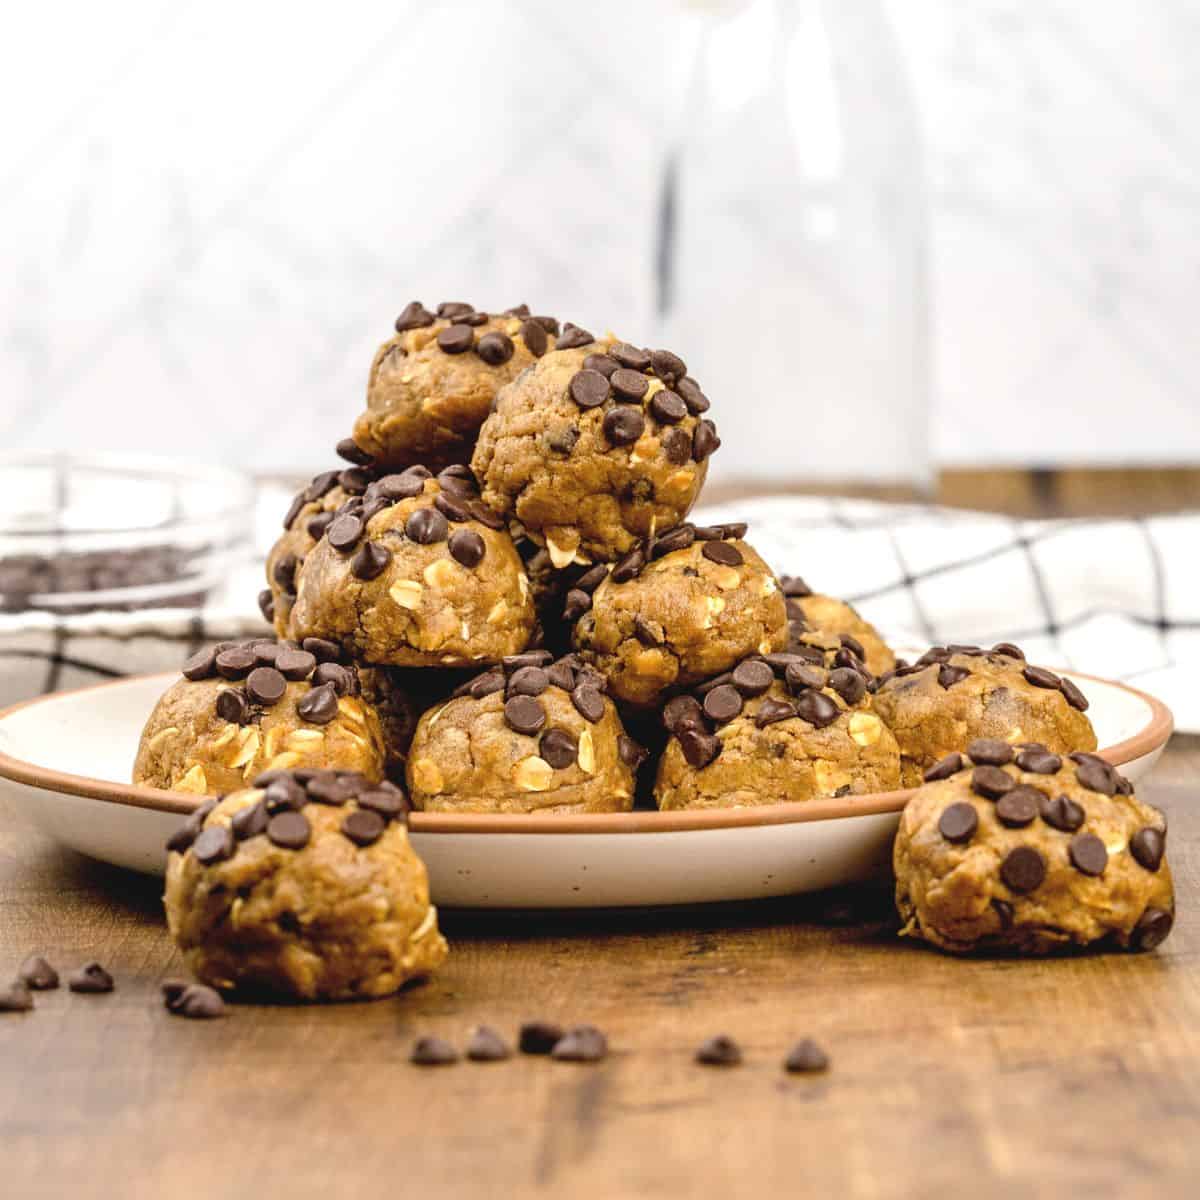 A square cropped image of multiple no bake chocolate chip cookie dough balls on a beige plate on a wood table in the kitchen. A towel and glass jar are blurred in the background. More mini chocolate chips are scattered around.